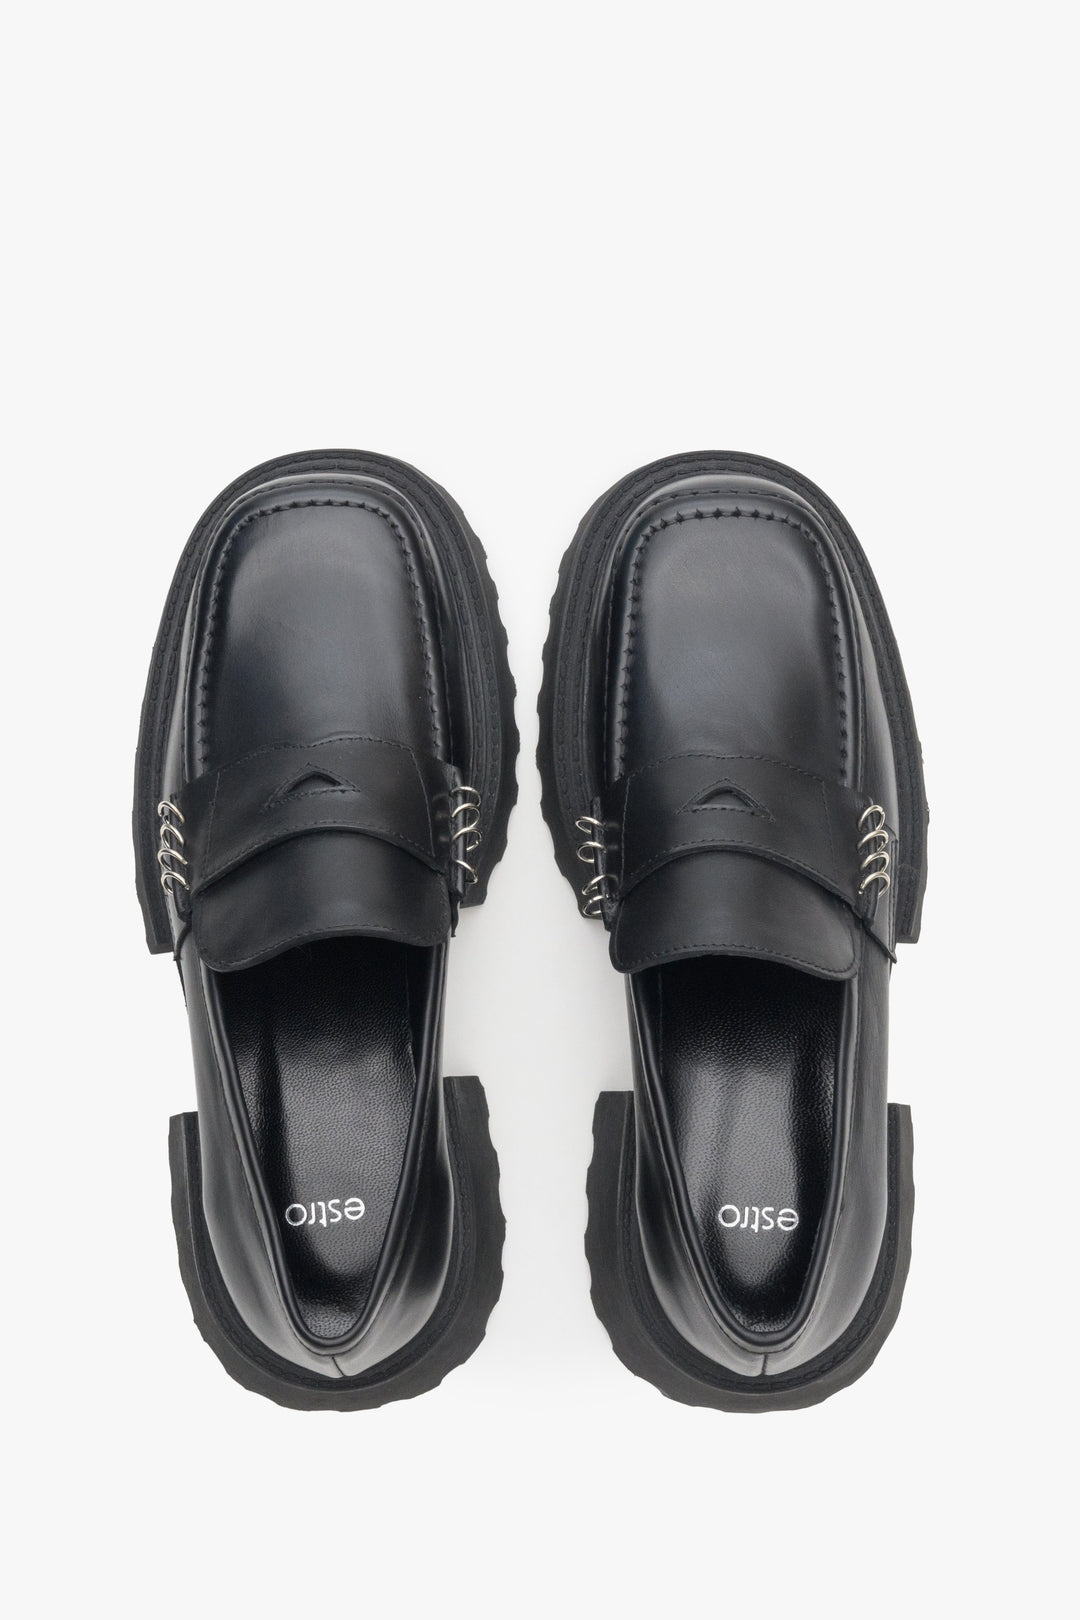 Women's black moccasins made of genuine leather by Estro - top view presentation of the model.